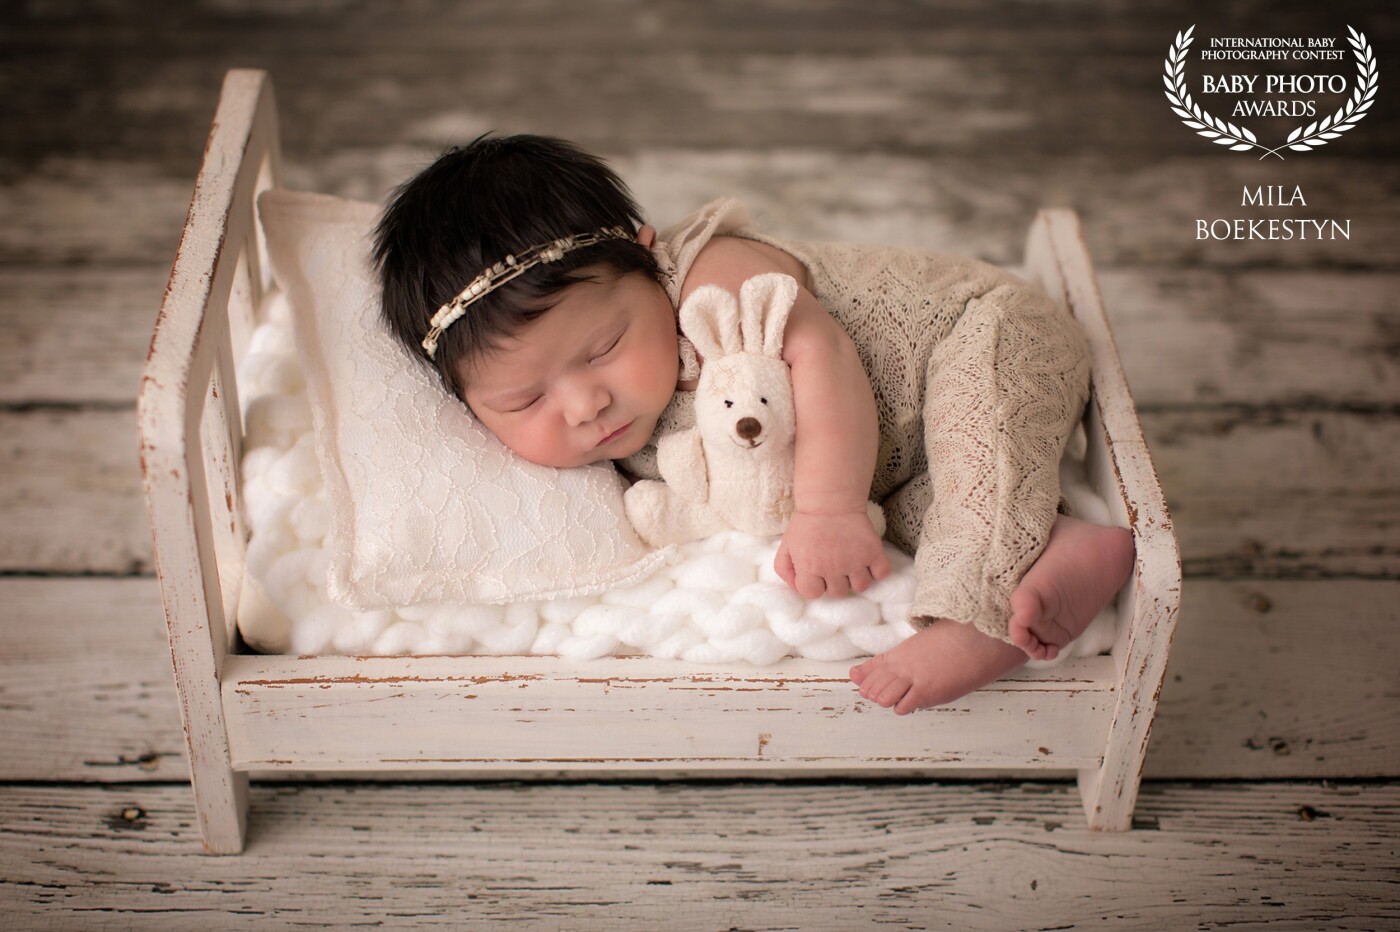 This gorgeous image of a beautiful 10-day old baby girl will be printed BIG and will be hanging in her nursery - that is HOW MUCH her parents loved this shot and the nursery is decorated in a bunny/rabbit theme - so this will be an amazing addition.  I am an on-location photographer and always bring with me a few little plush toys to photograph with my newborn clients. As soon as I have realized that her nursery is decorated with bunnies and Easter is around the corner - this set up was created!